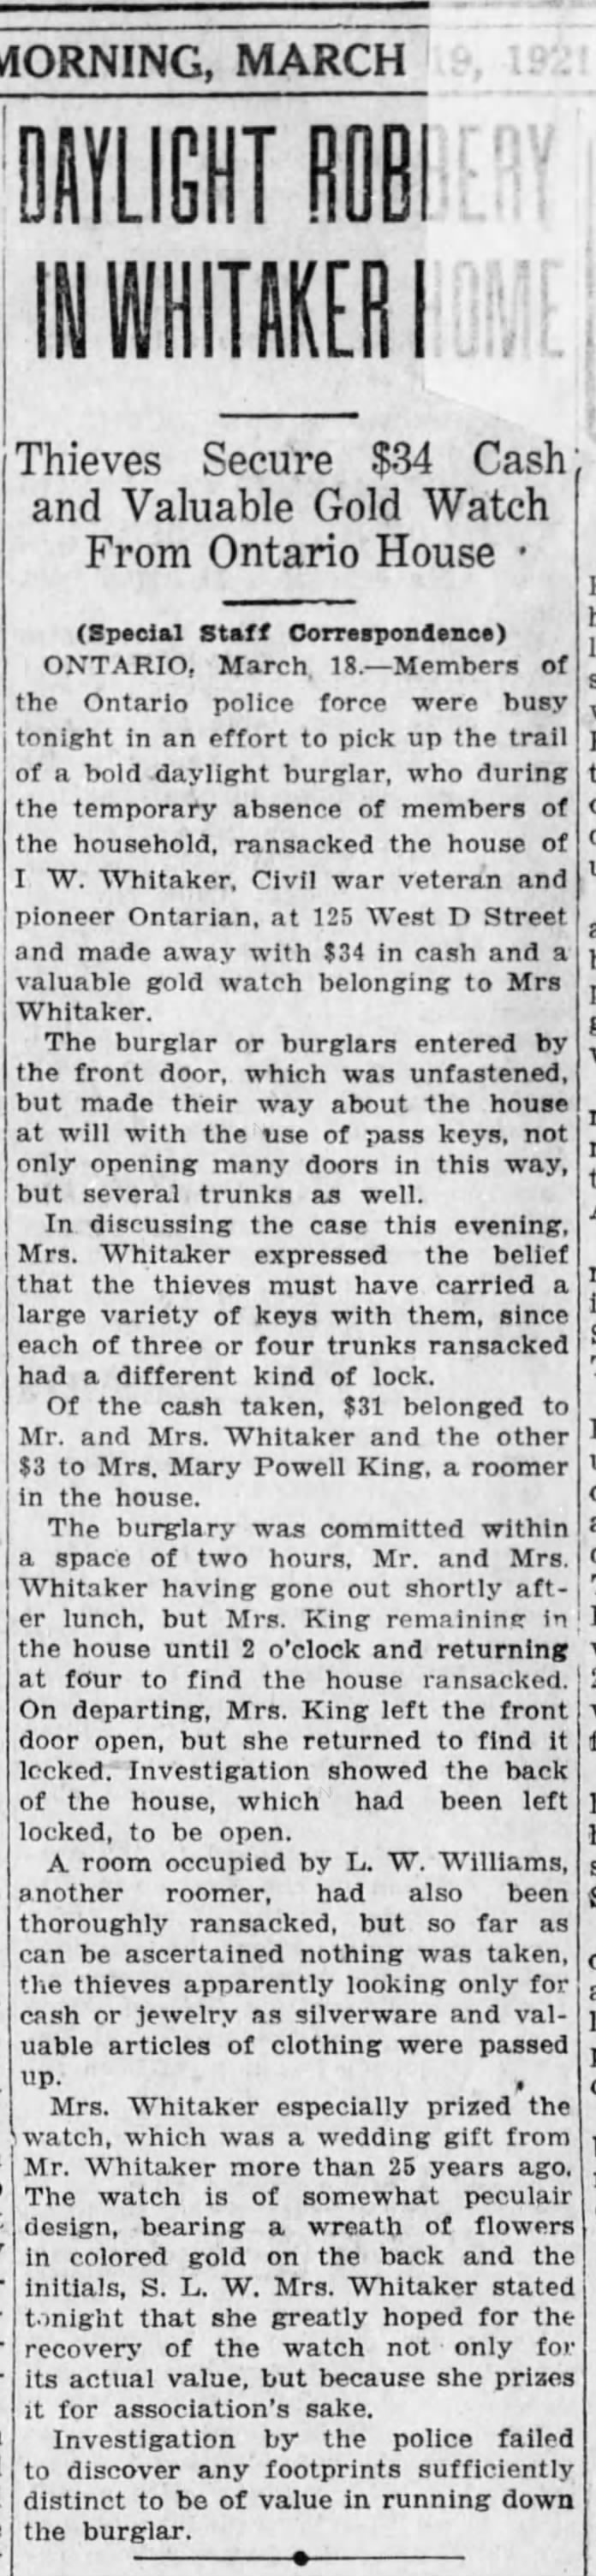 1921-03-19 WHITAKER WILLIAM HOUSE ROBBED